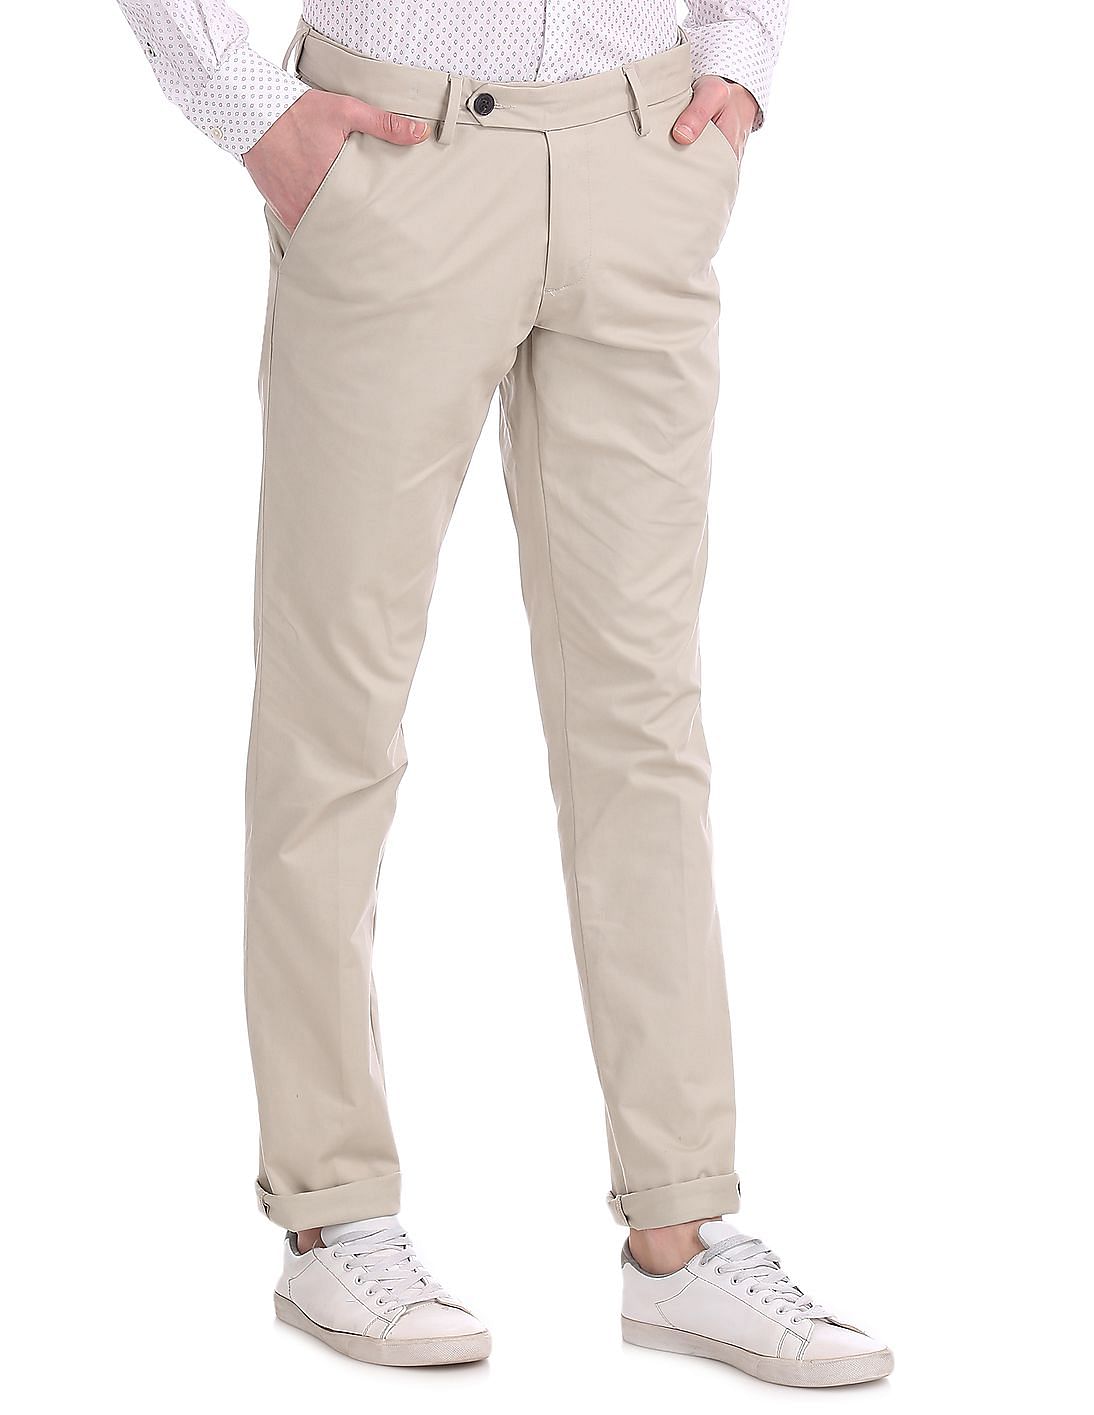 Buy AD by Arvind Beige Tailored Regular Fit Solid Chinos - NNNOW.com